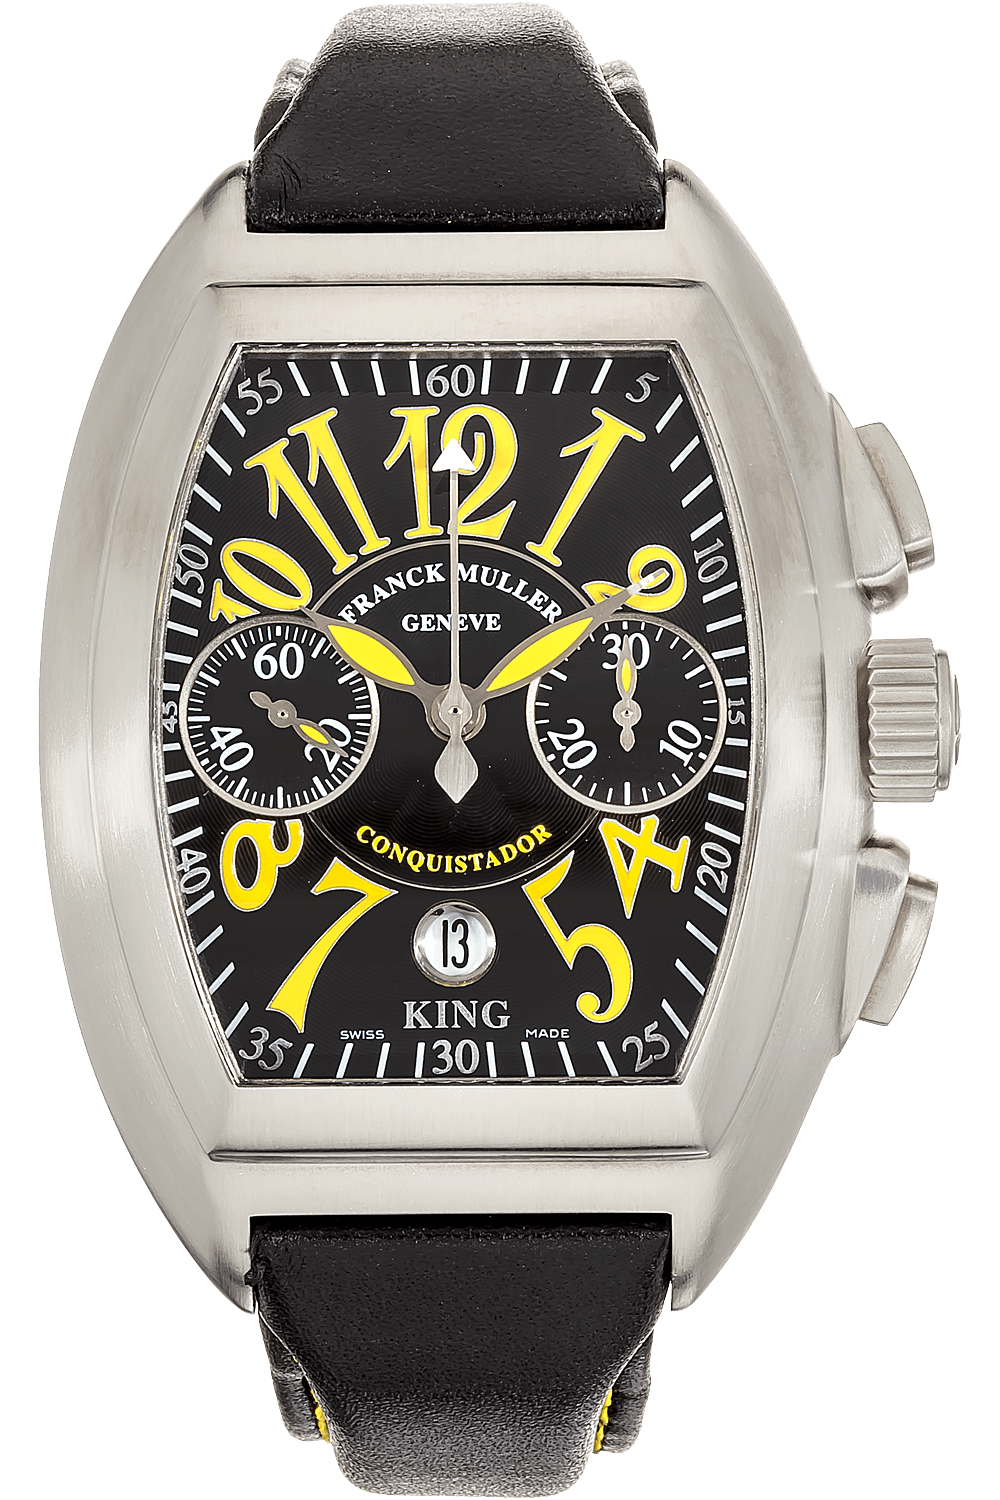 Franck Muller King Conquistor Soleil Limited Edition Chronograph Watch Watches Franck Muller